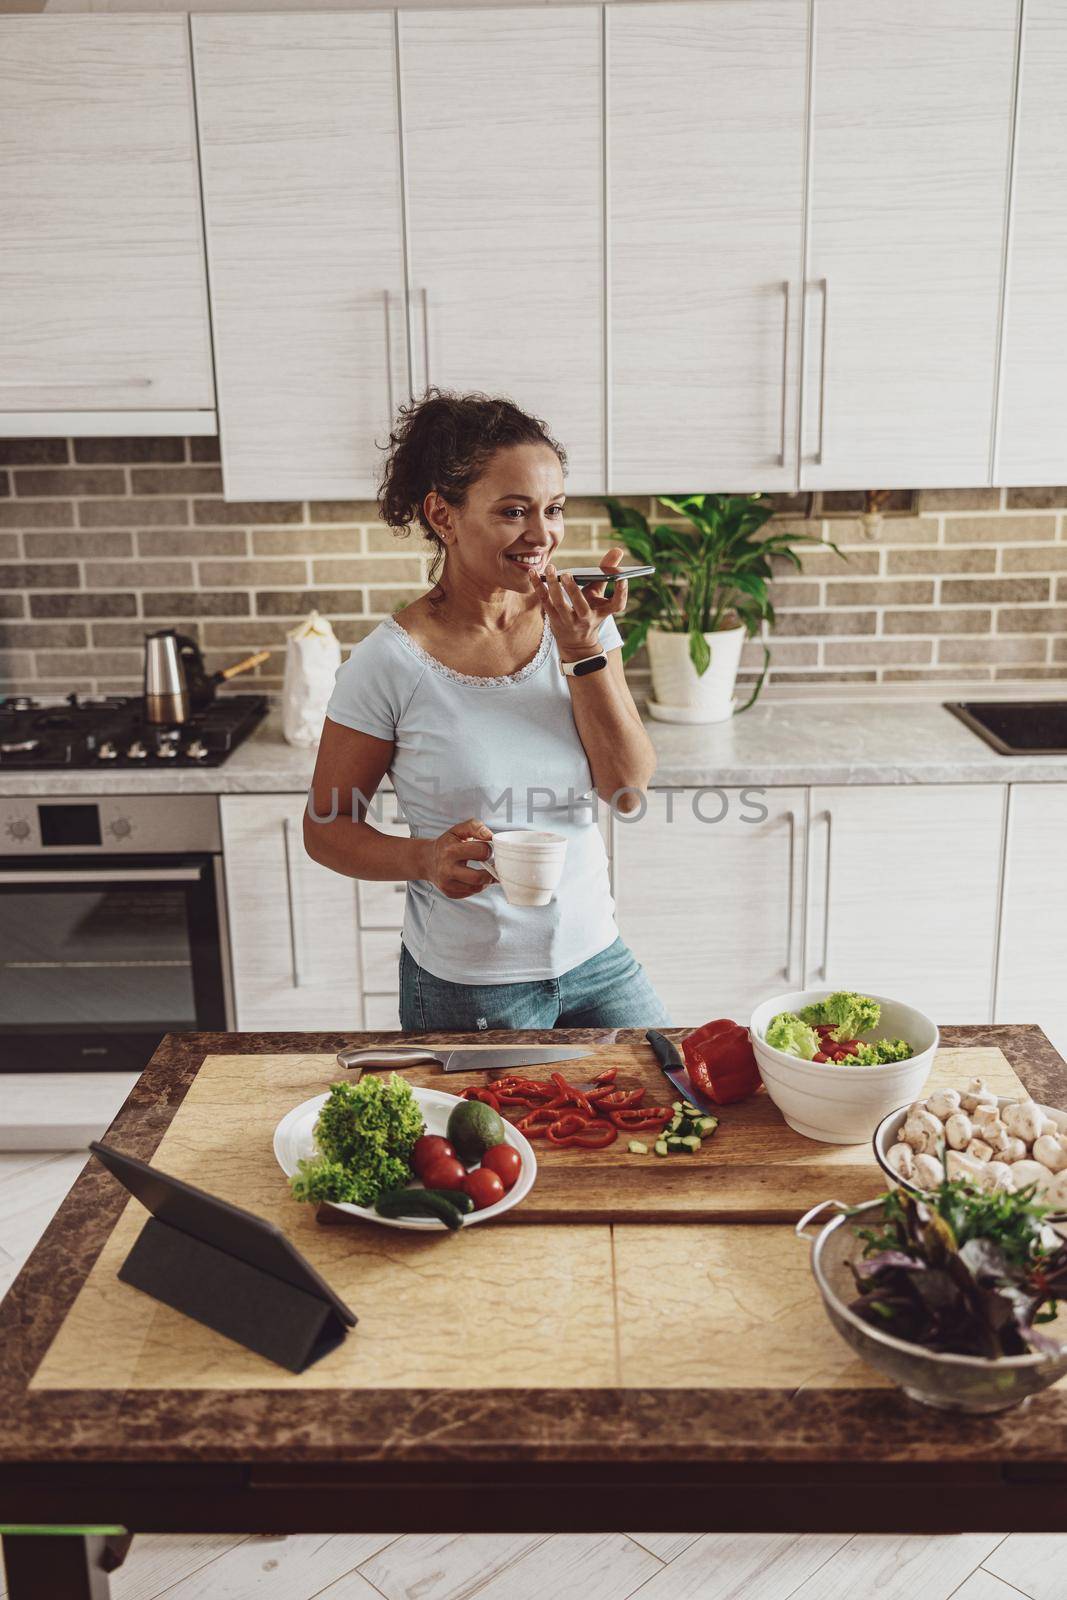 A woman talks on the phone in a pause while slicing vegetables by Yaroslav_astakhov